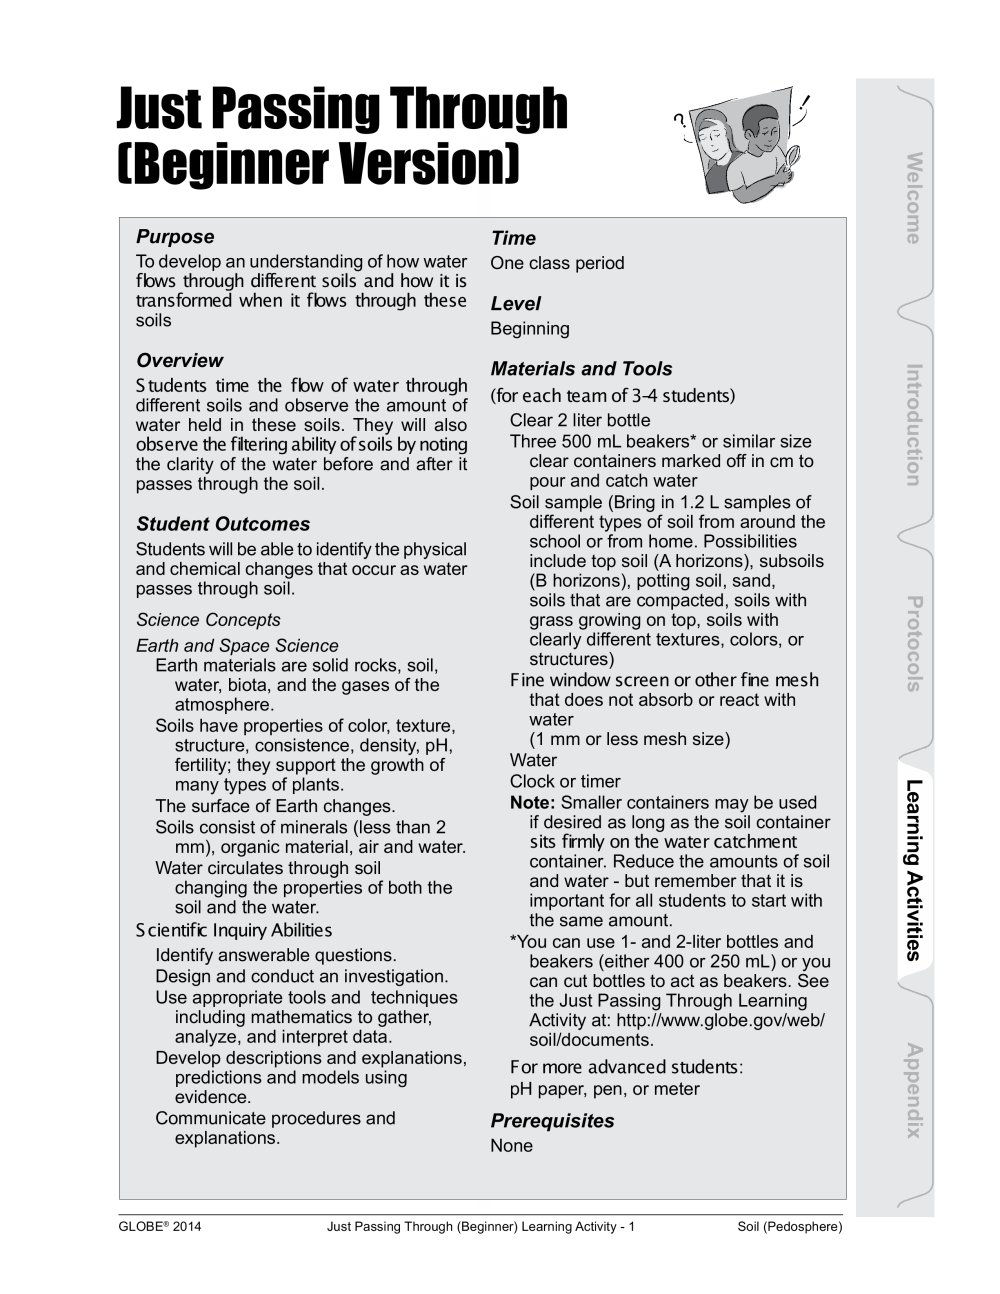 Learning Activities preview for Just Passing Through (Beginner Version)